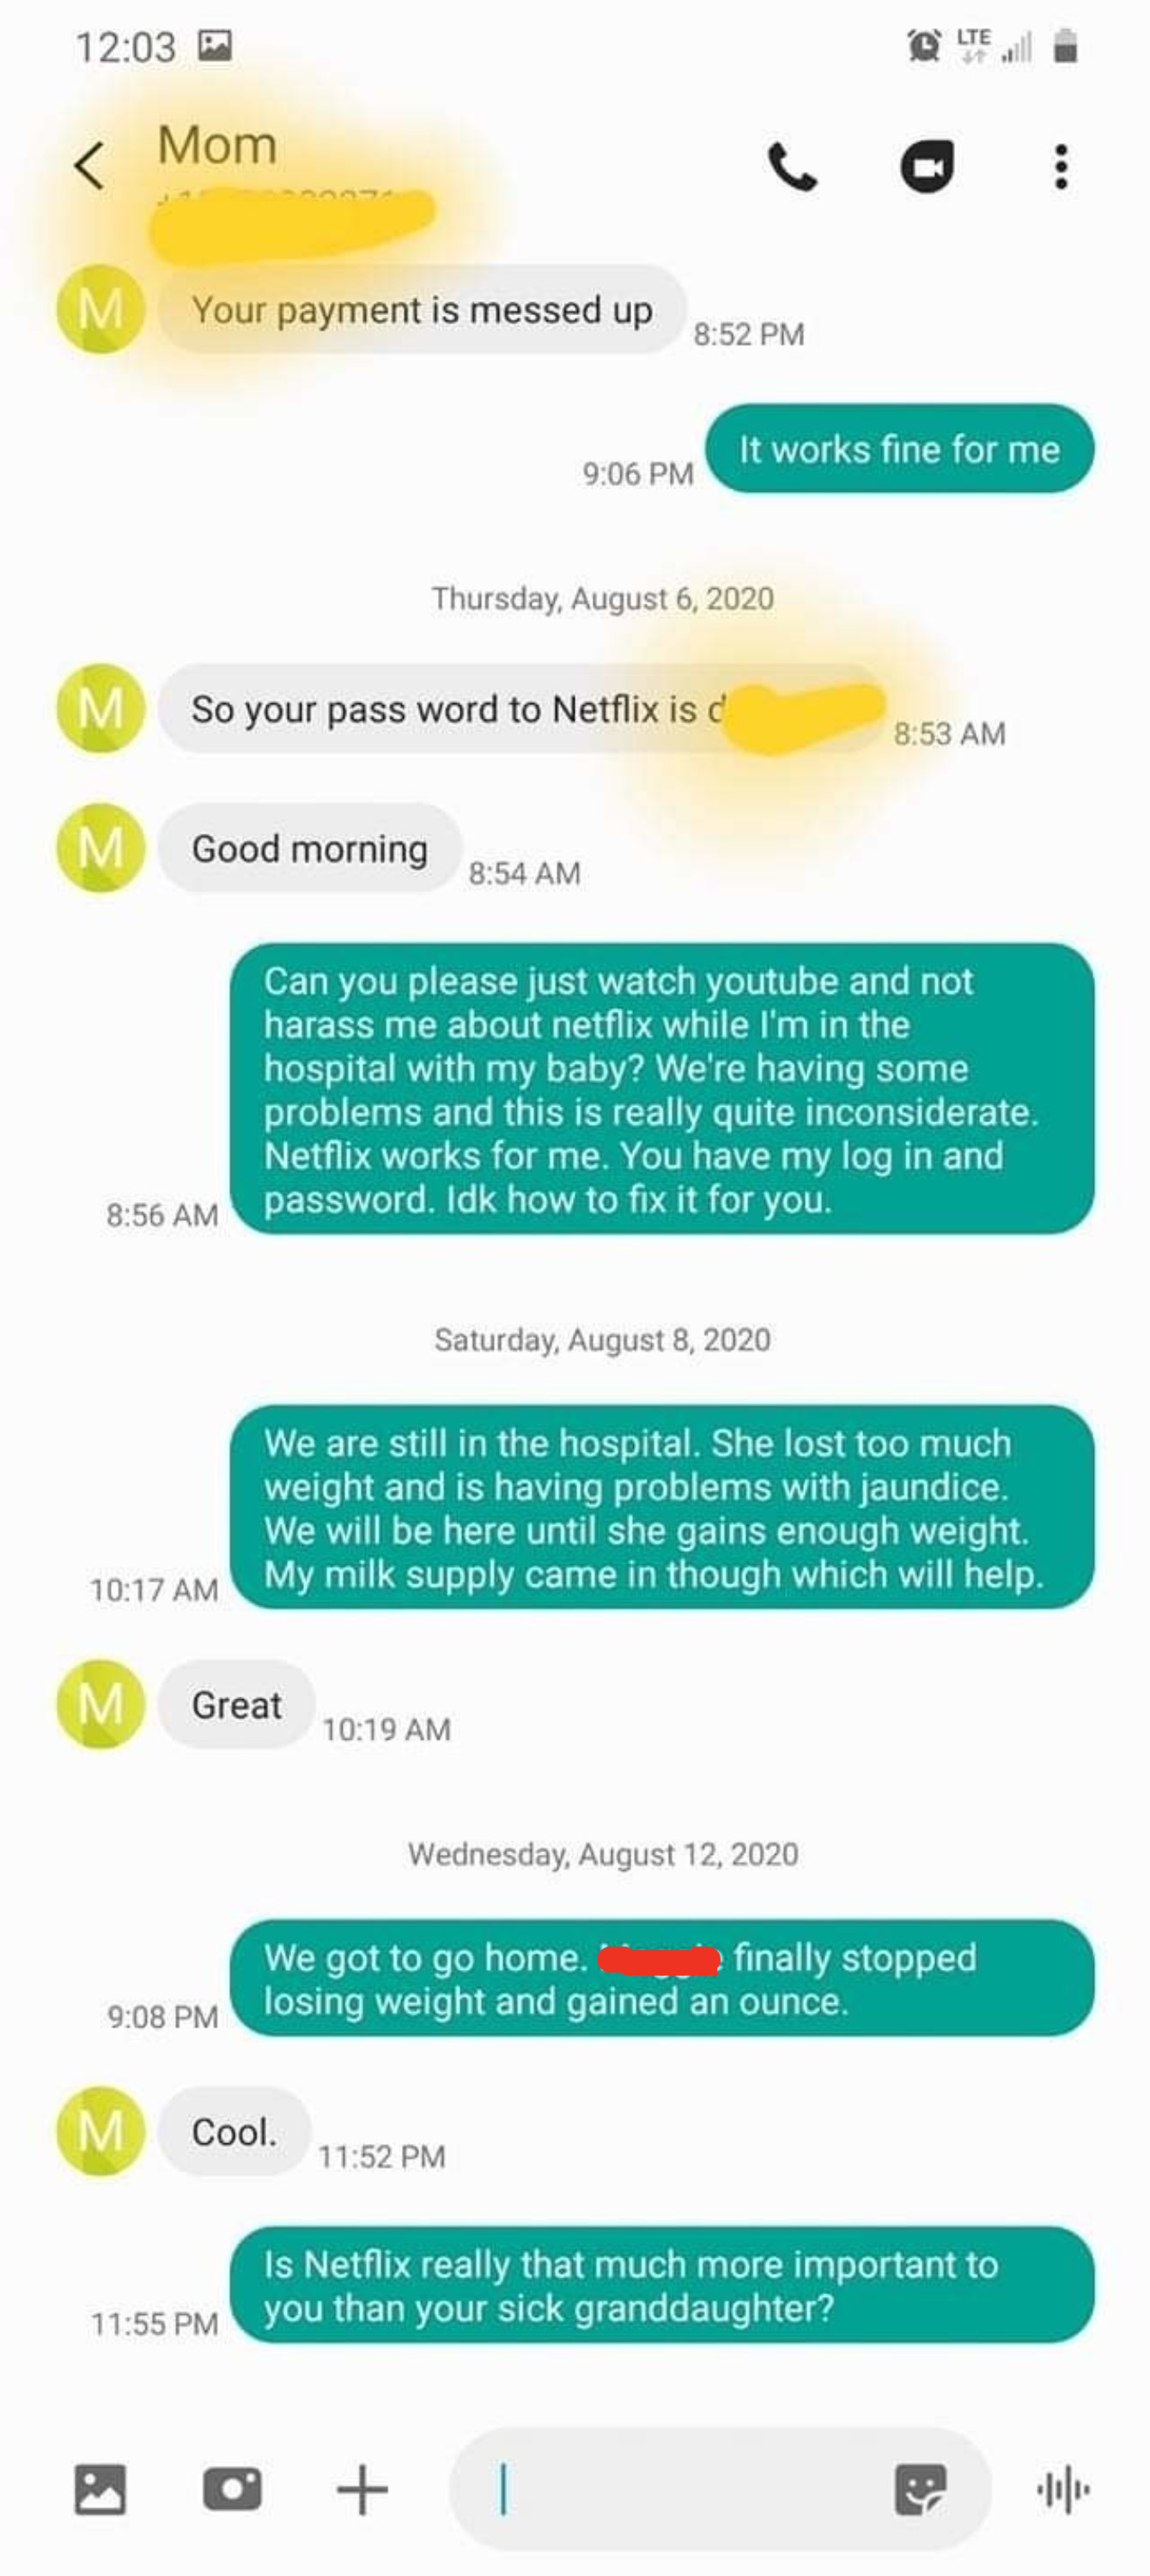 Mom asking her daughter for Netflix password and not checking in about her granddaughter&#x27;s health